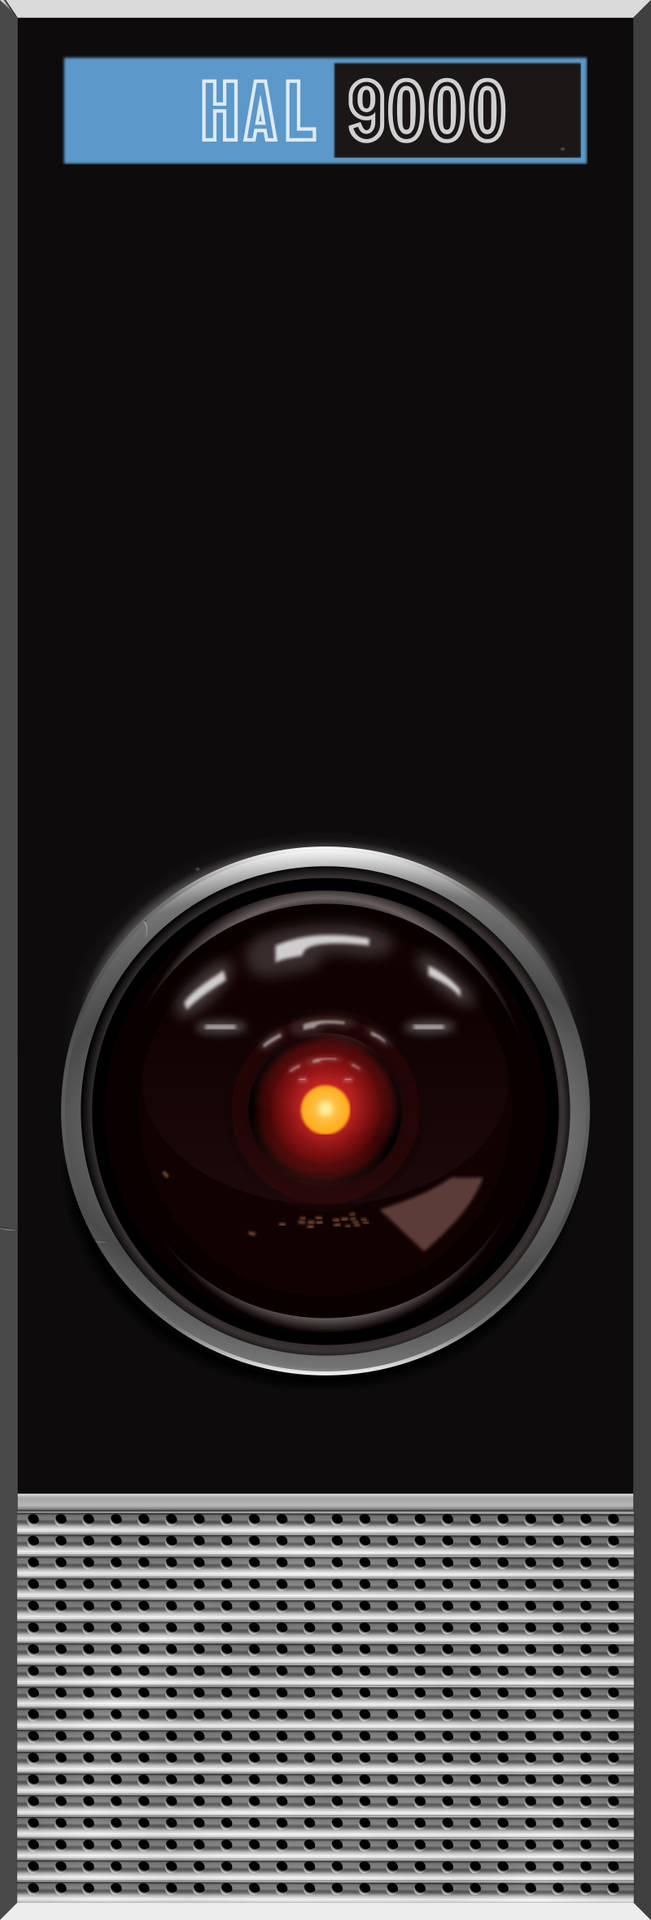 Hal 9000 Iphone Background